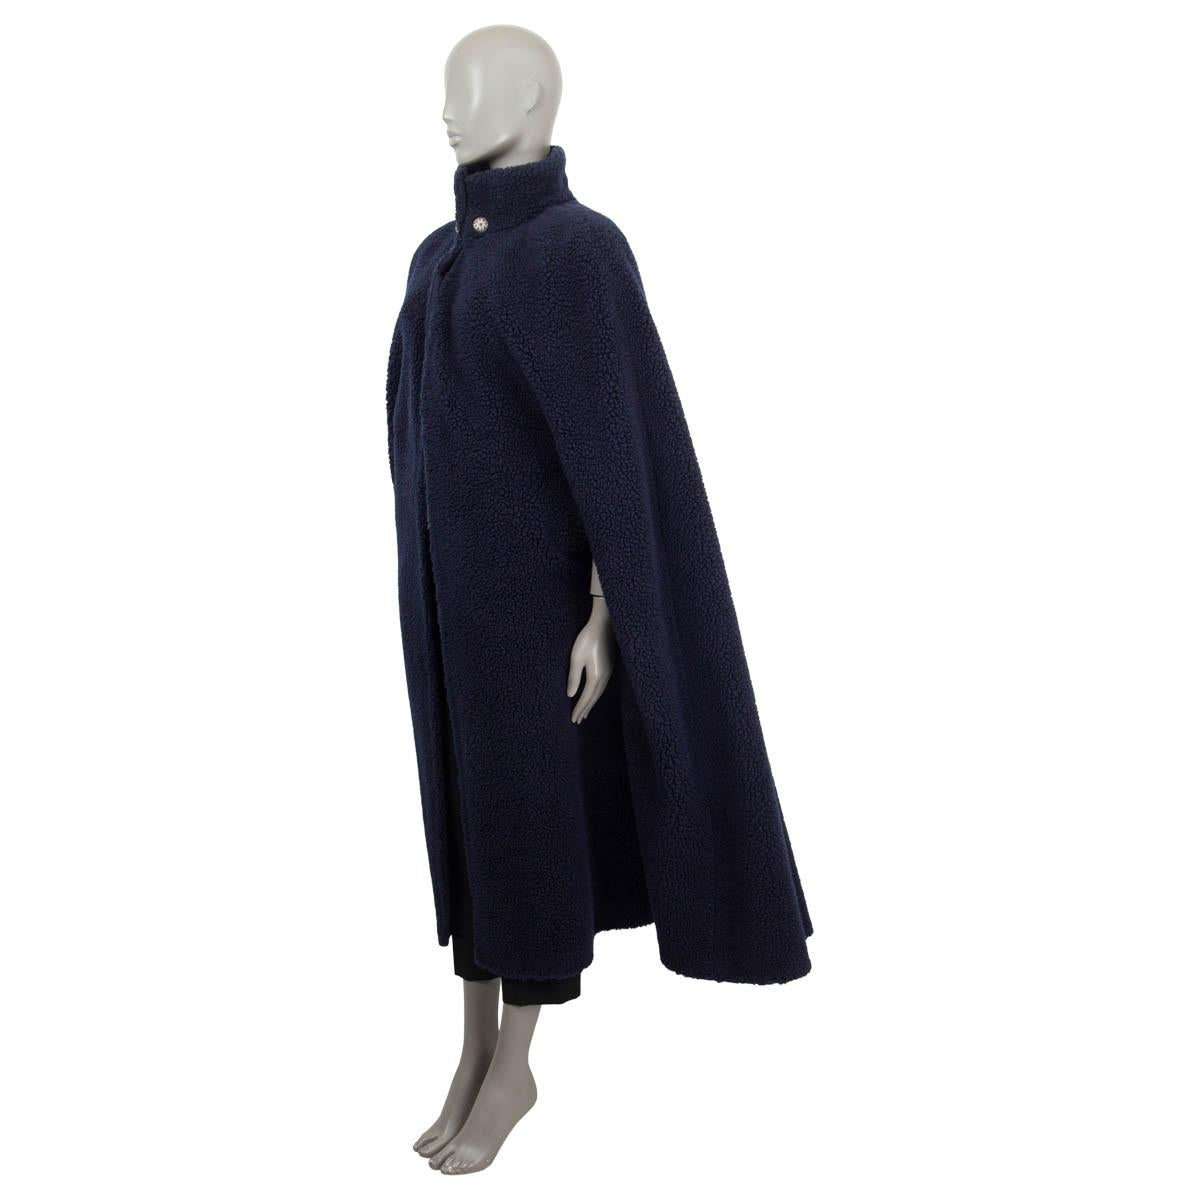 100% authentic Chanel long teddy cape in navy blue cashmere (82%) and silk (18%). Lined in navy blue wool (100%). Cloeses with a hook by the neck and features two blue stone embellished buttons. Has been worn and is in excellent condition. 

2019